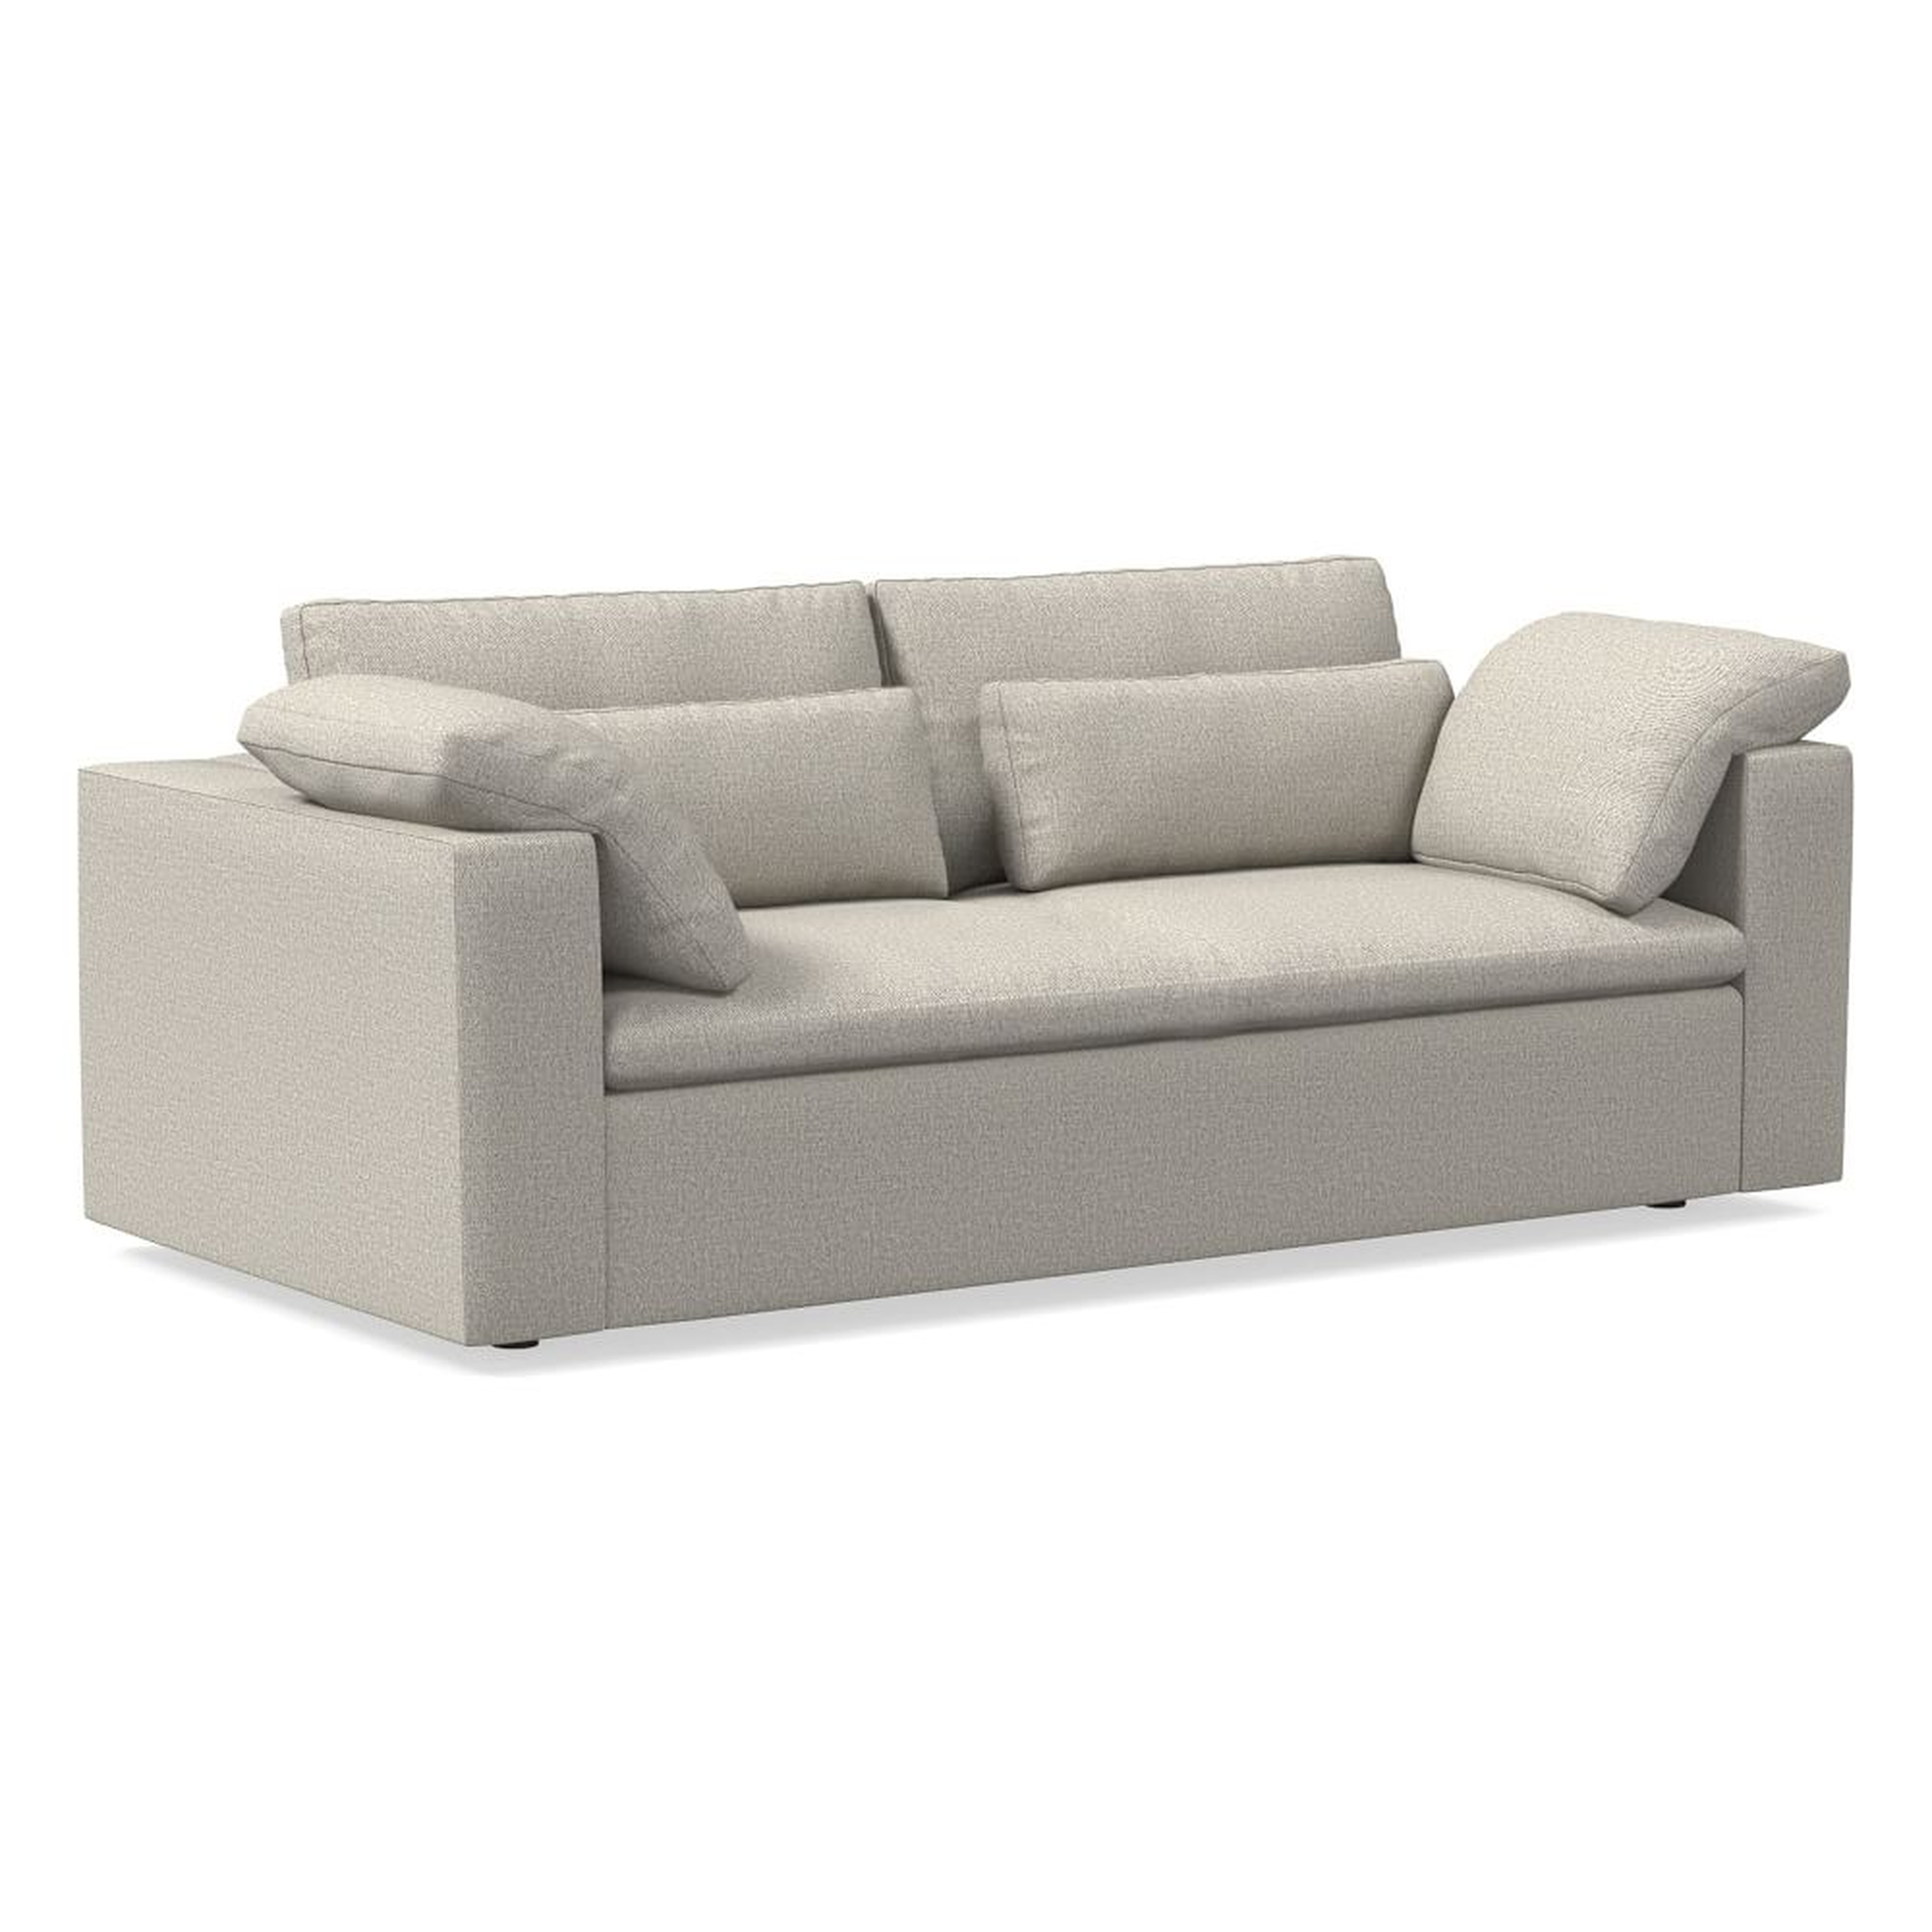 Harmony Modular Sleeper Sofa, Down, Performance Twill, Dove, Concealed Supports - West Elm